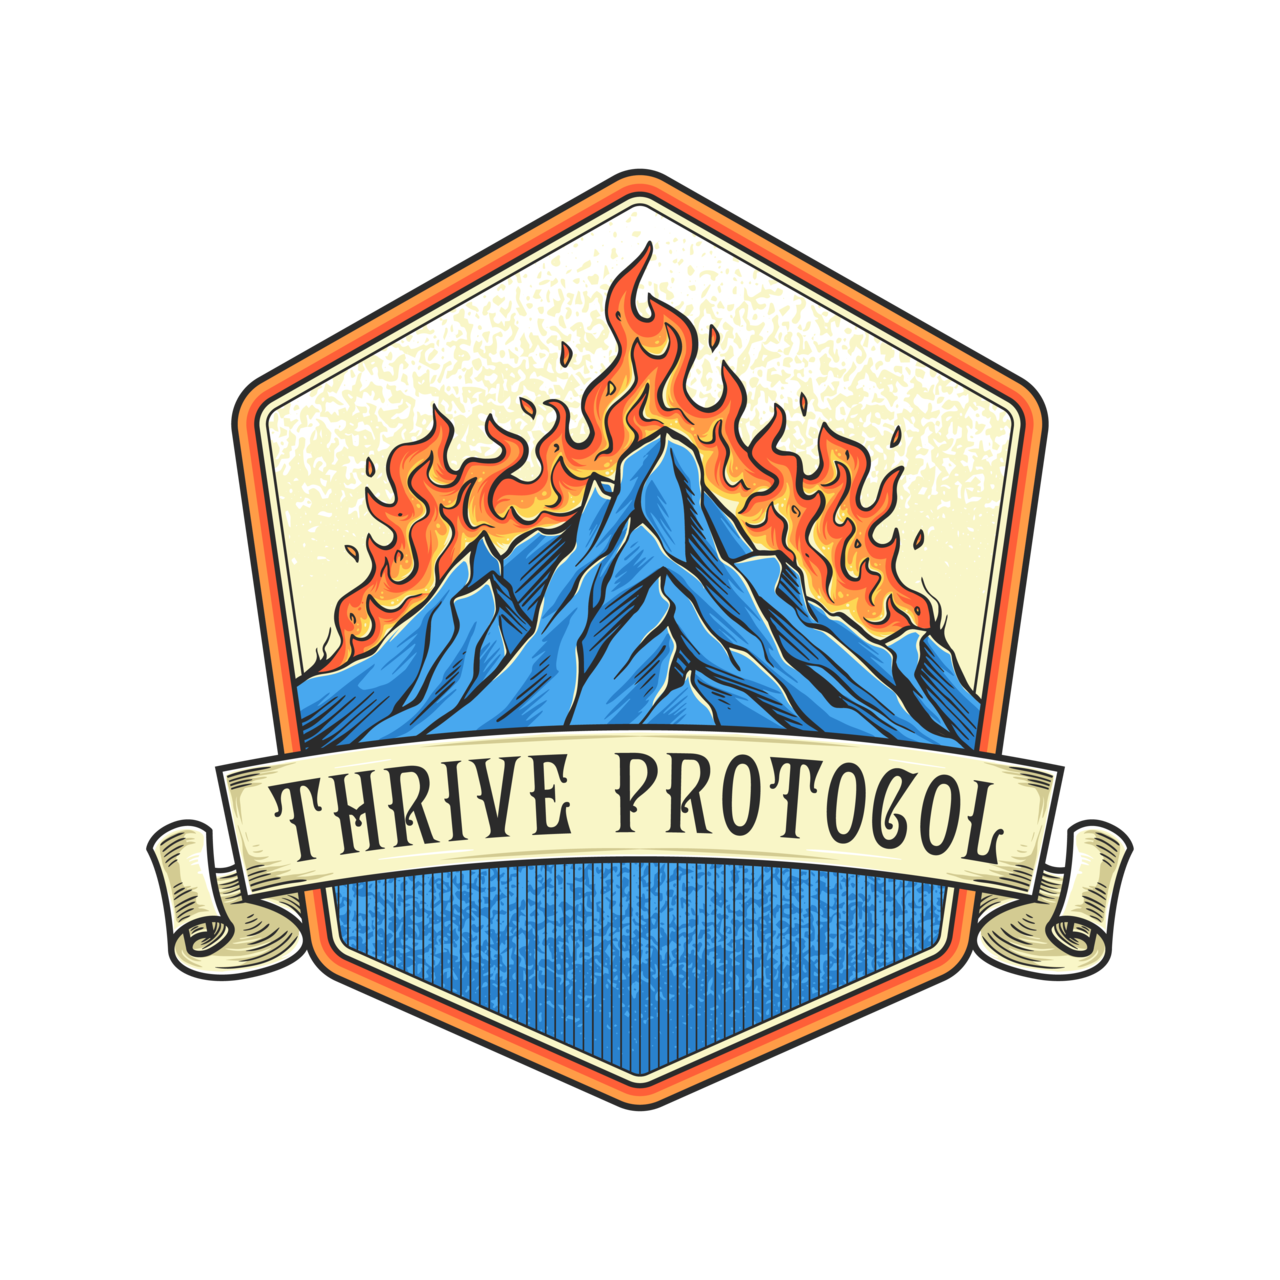 The Thrive Protocol Letter